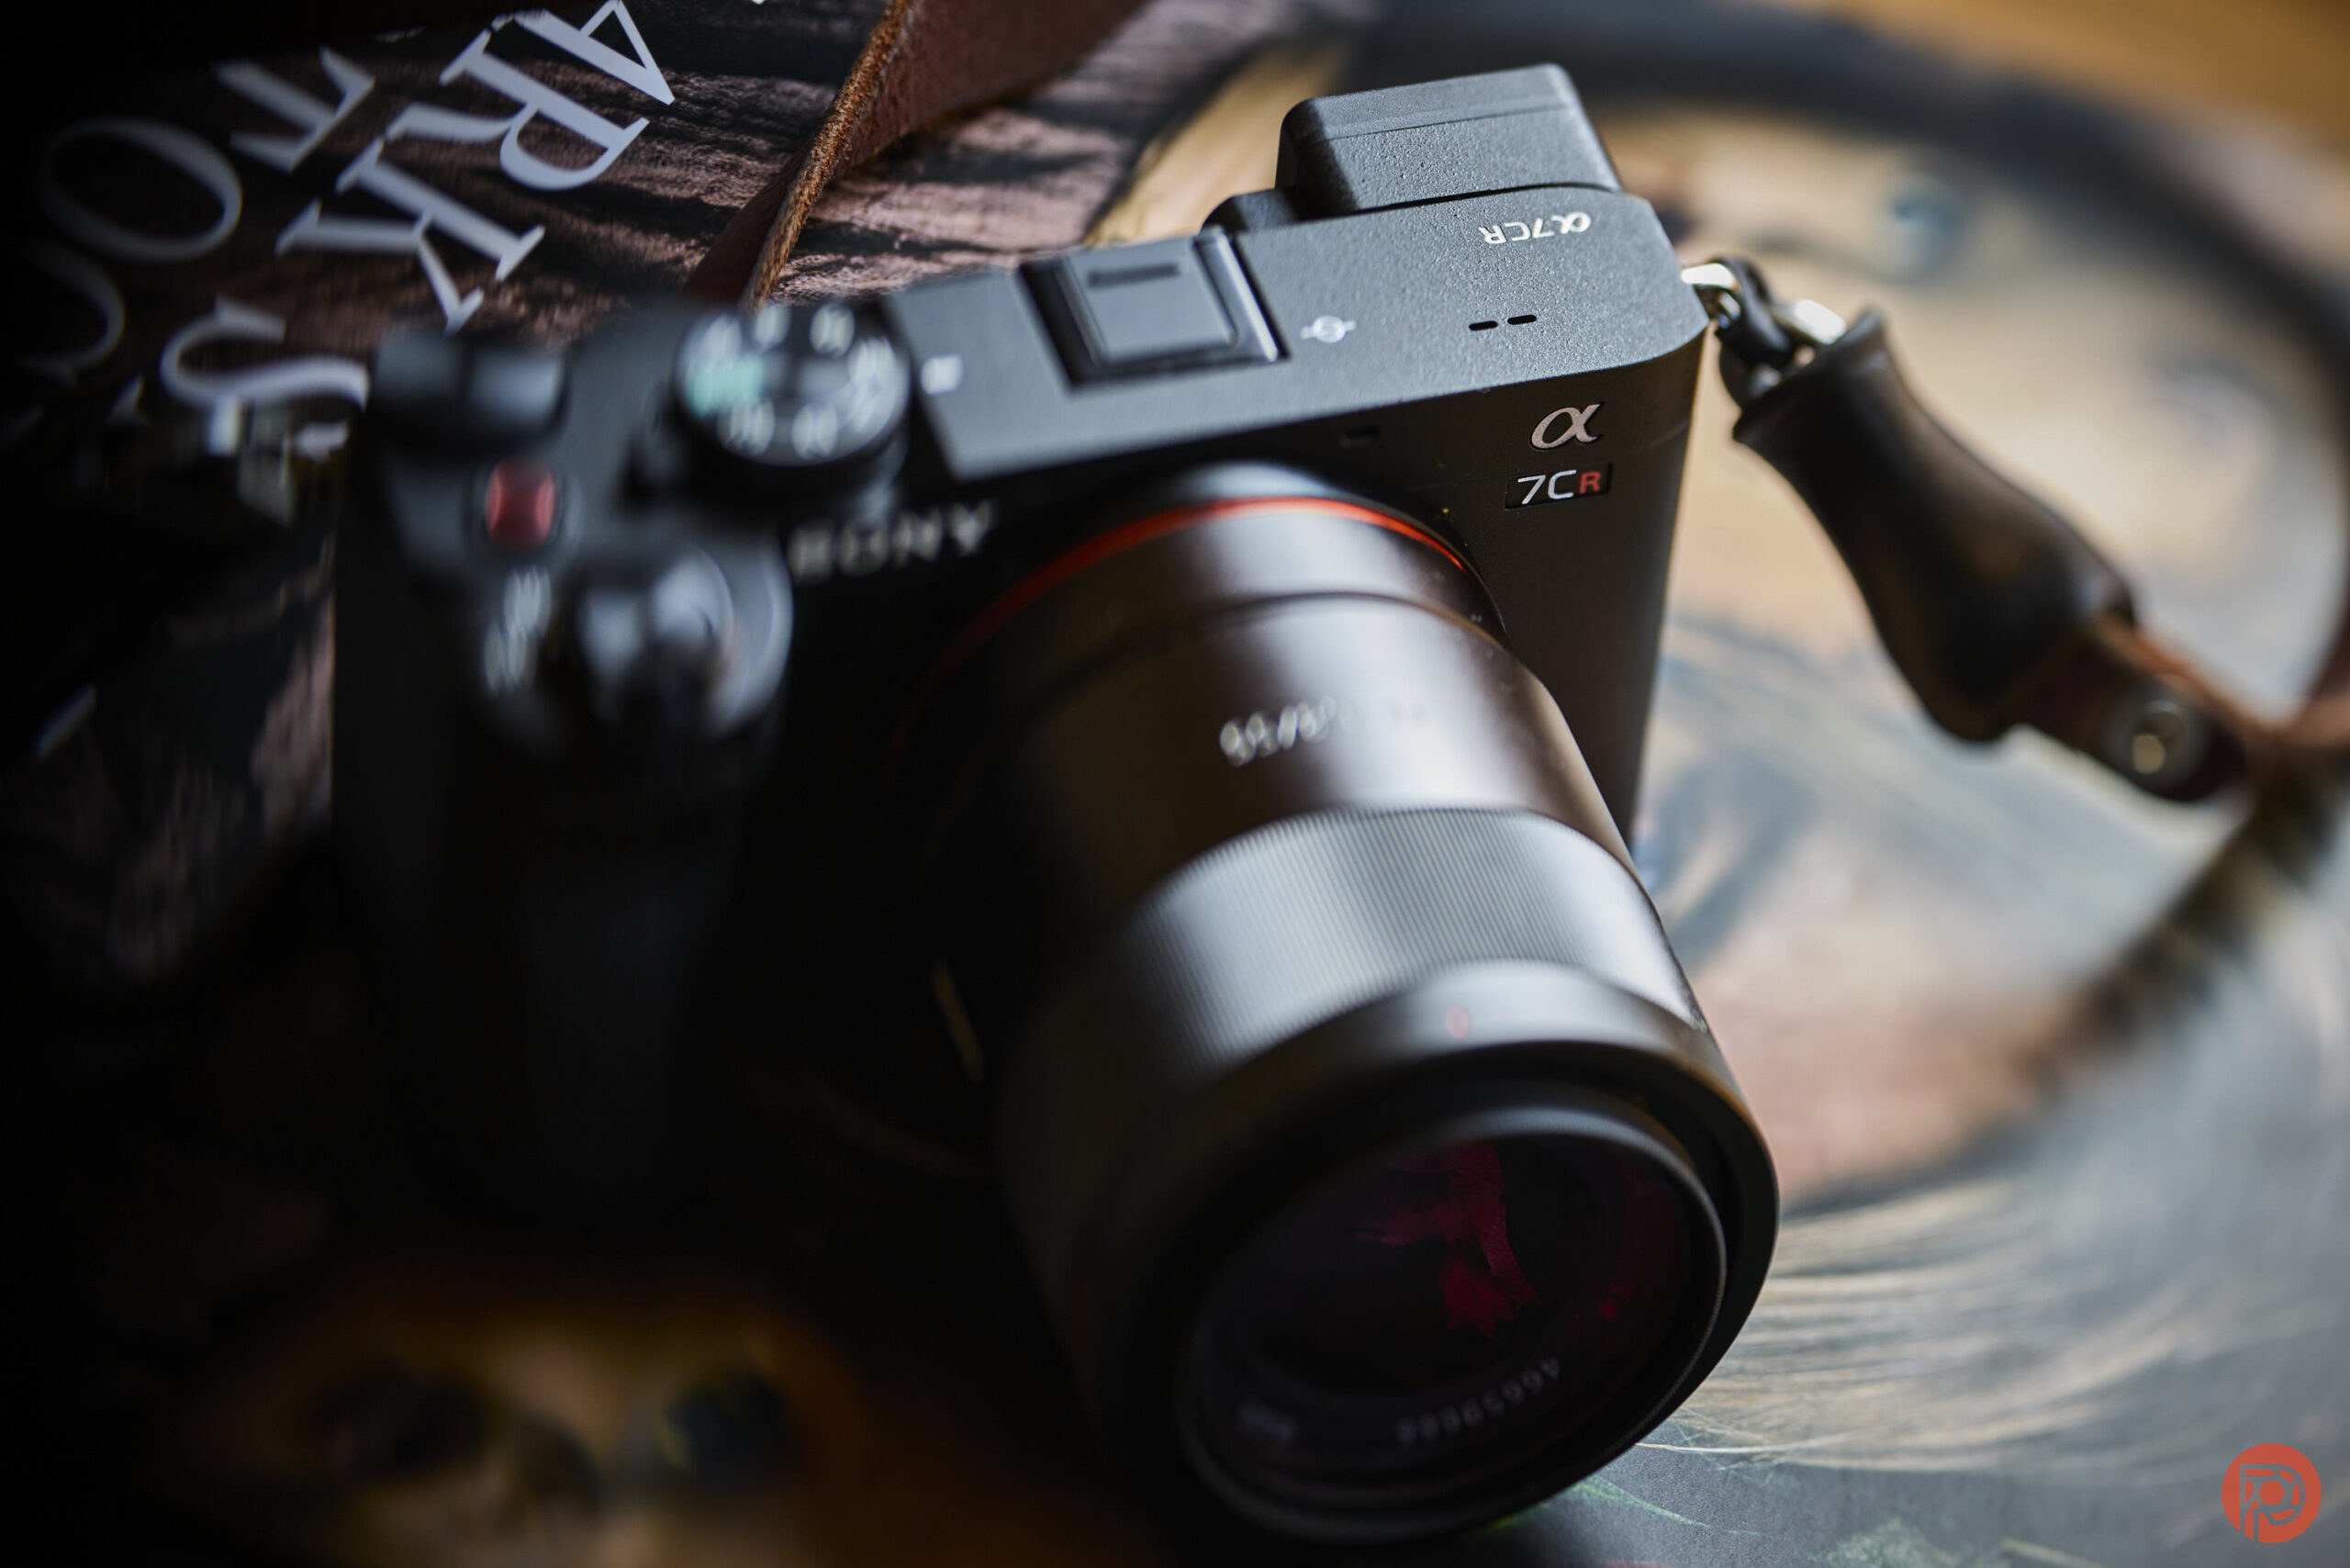 https://www.thephoblographer.com/wp-content/uploads/2023/08/Chris-Gampat-The-Phoblographer-Sony-a7cR-review-images-tilt-shift-photos-41-40s400-scaled.jpg